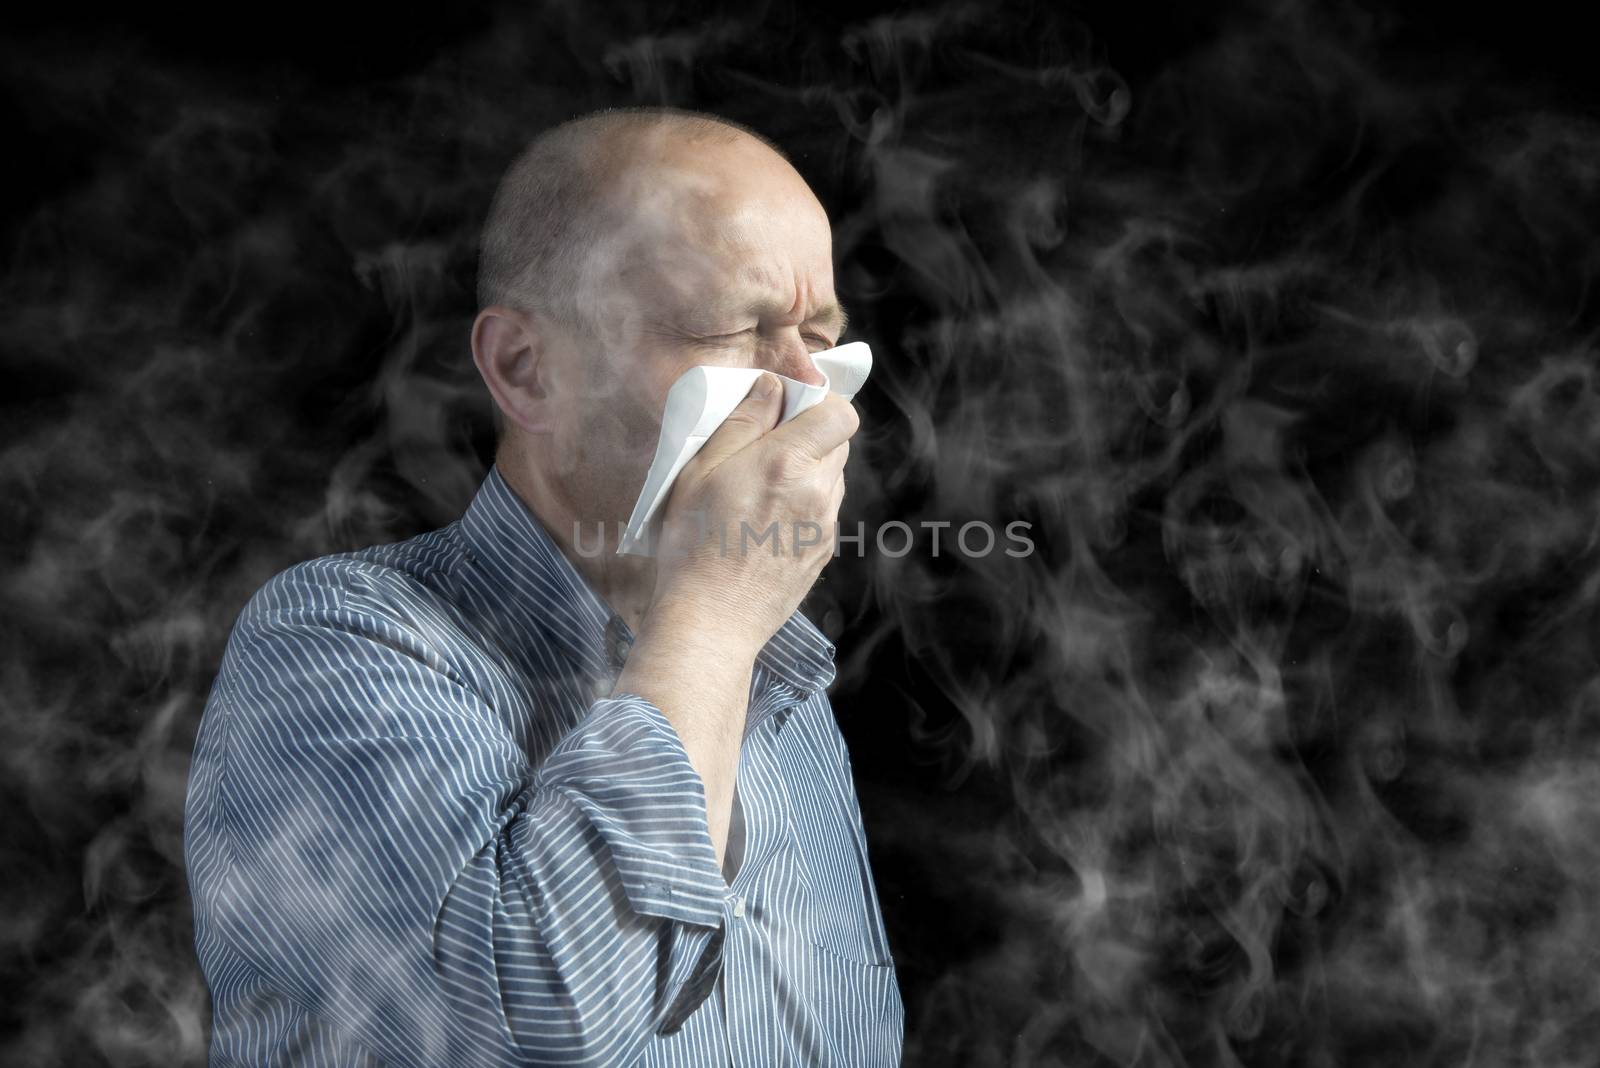 a man covers his mouth to protect himself from the smoke in the environment